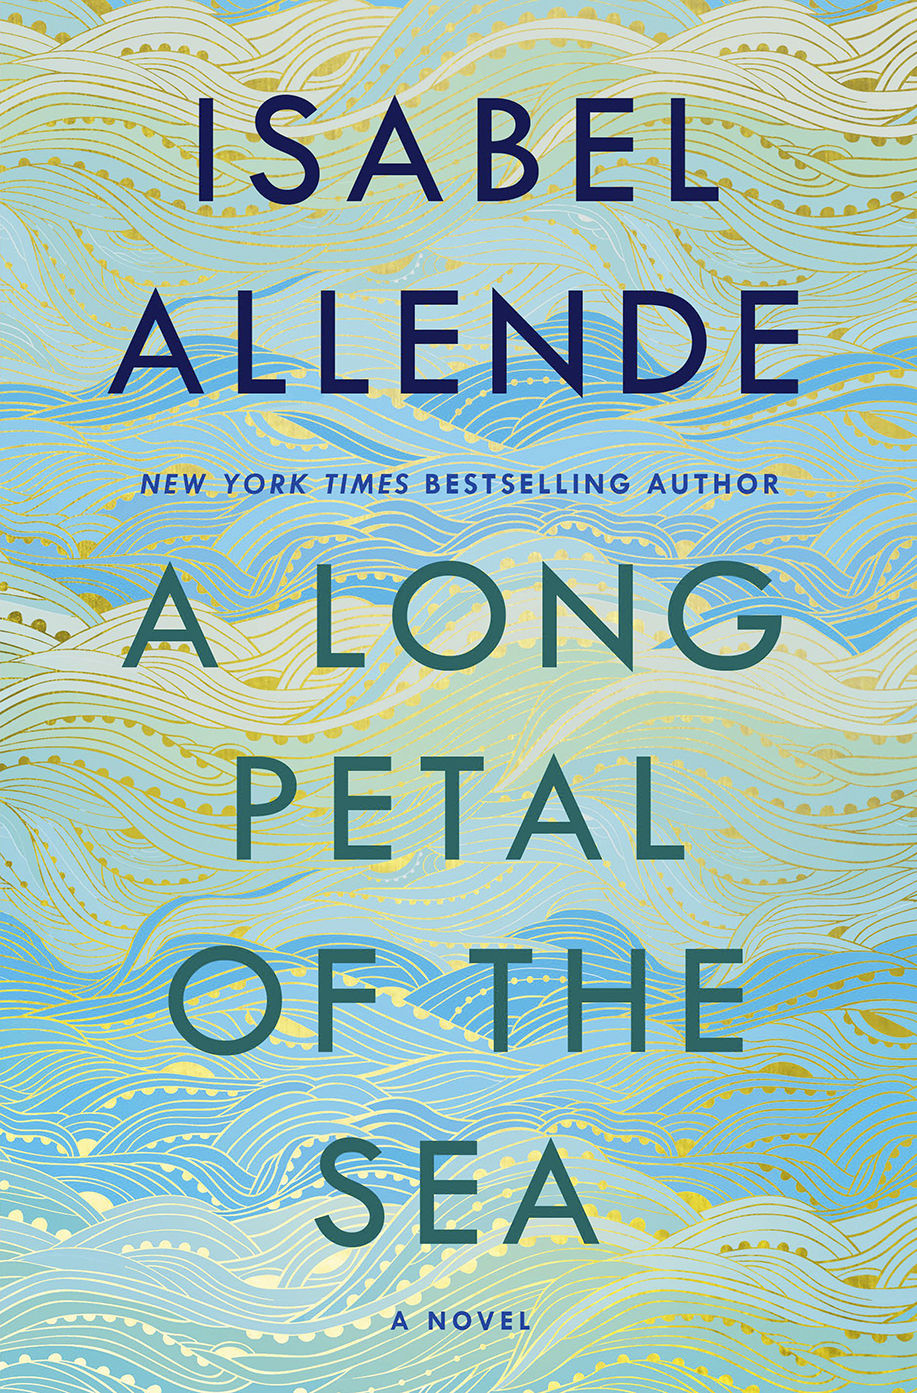 isabel allende a long petal of the sea summary